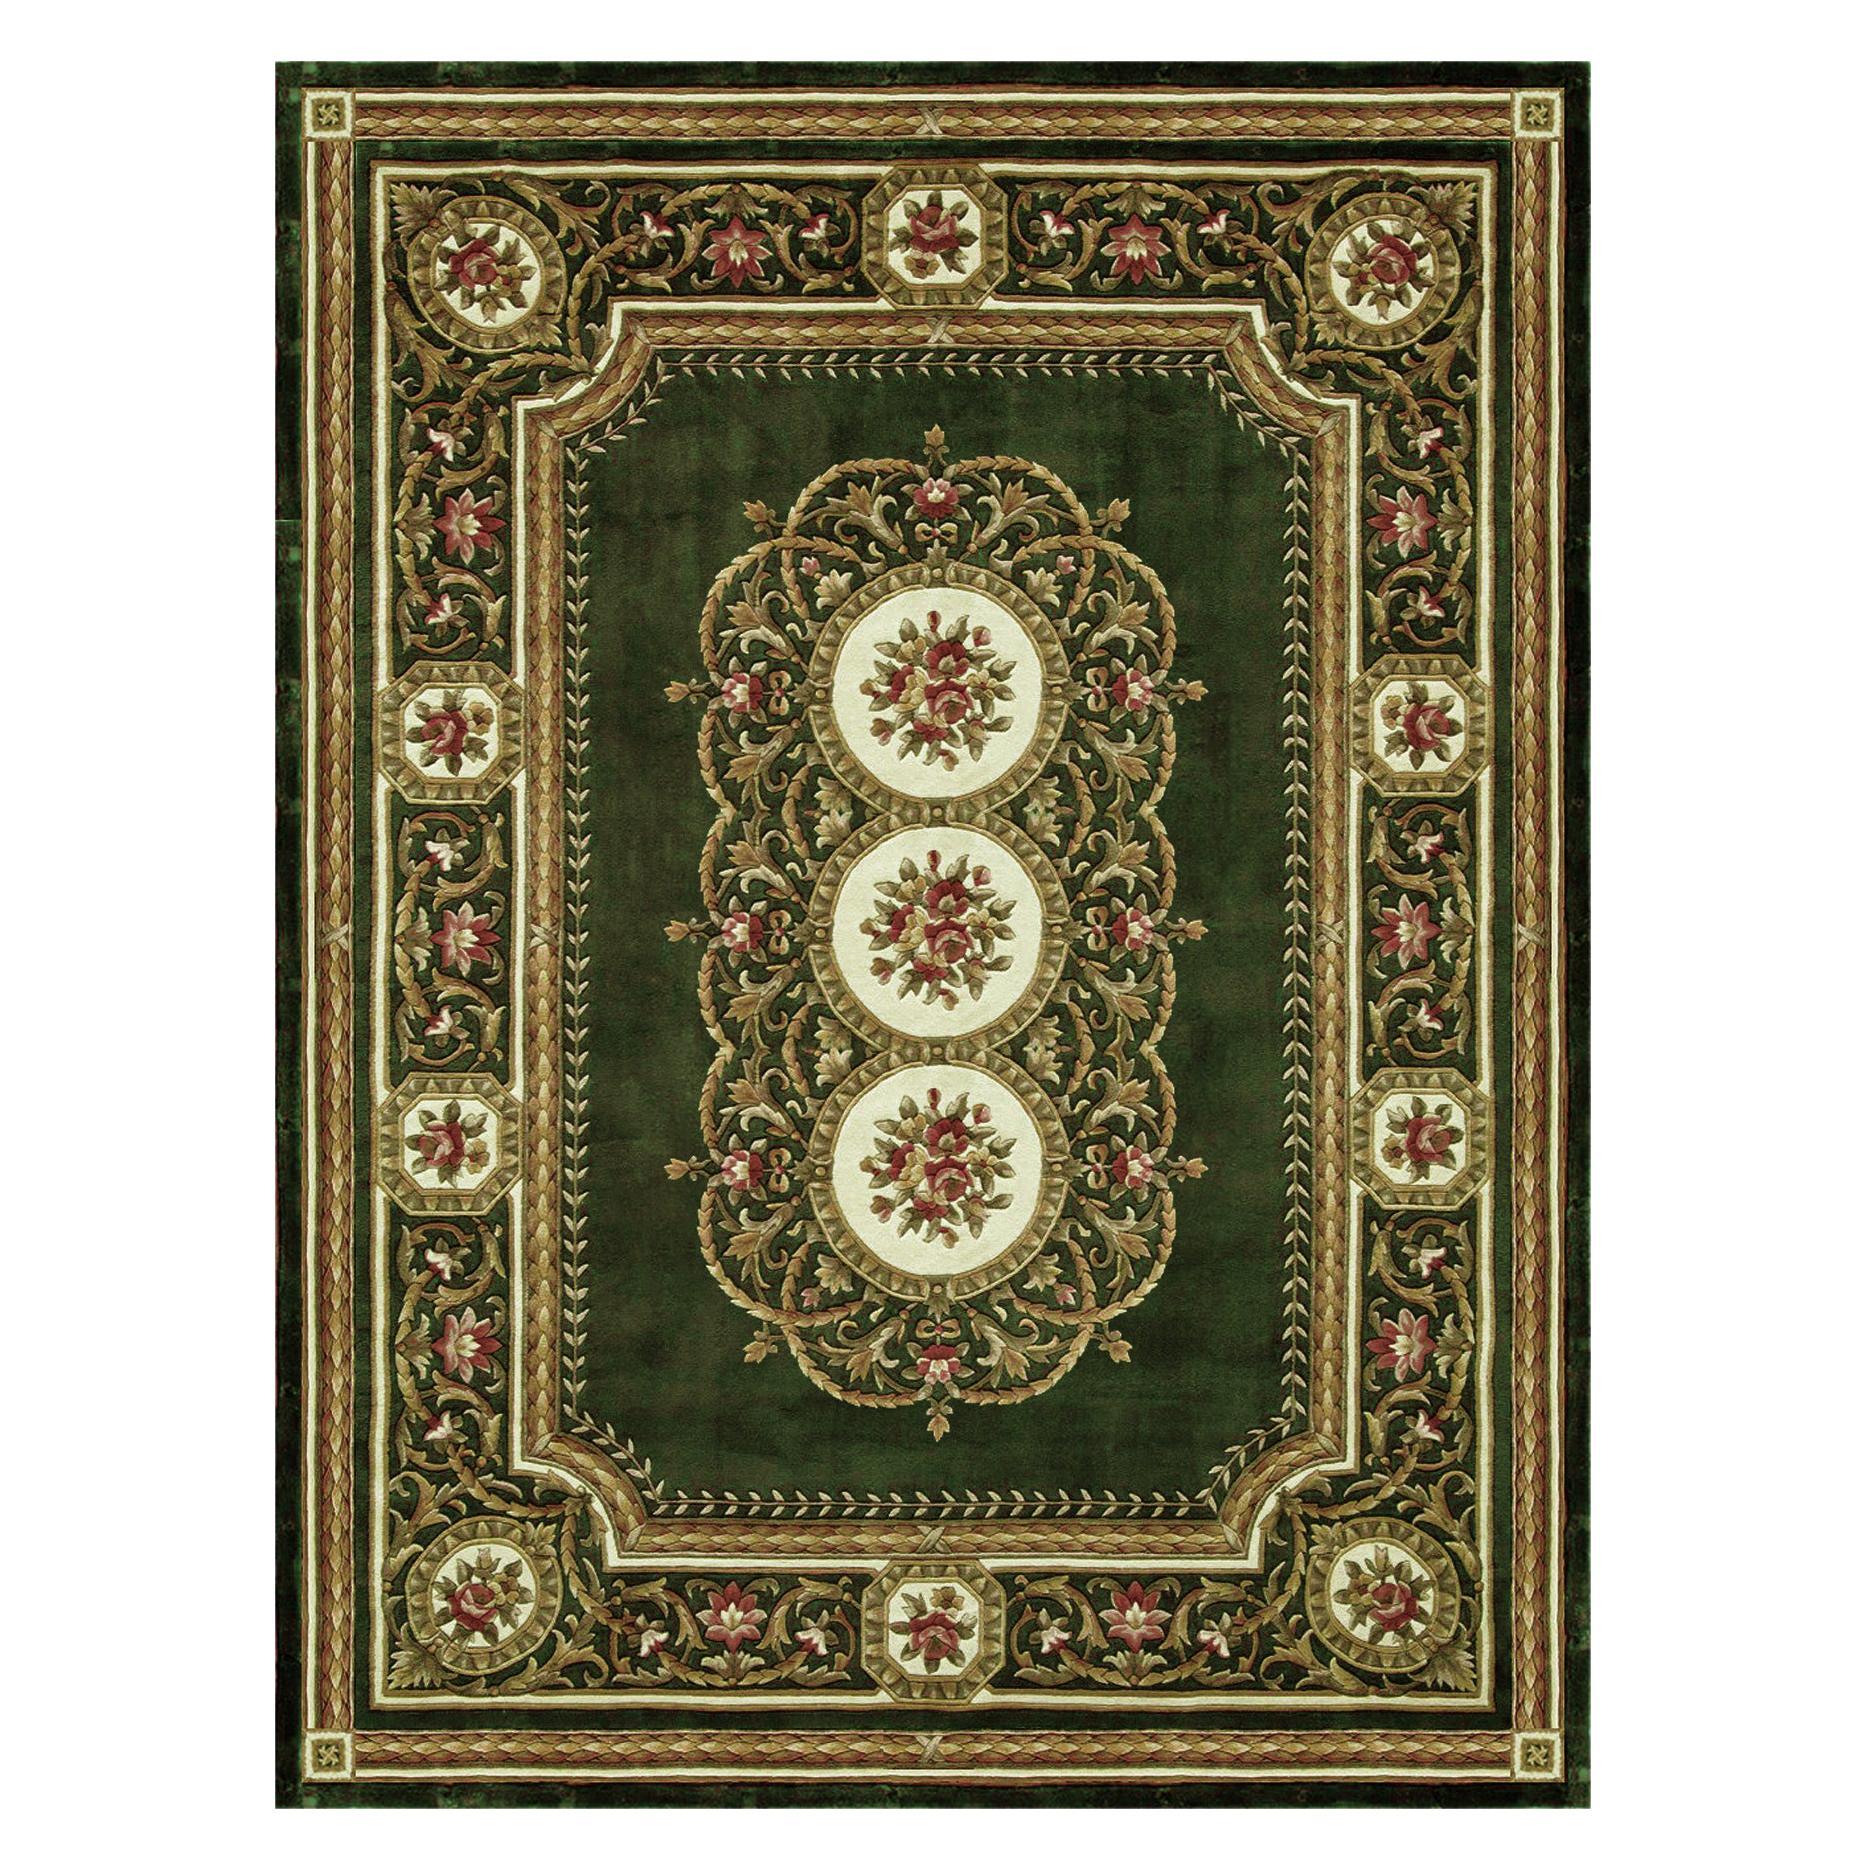 21st Century Bamboo Silk Handknotted Rug by Modenese Interiors, Persian Emerald